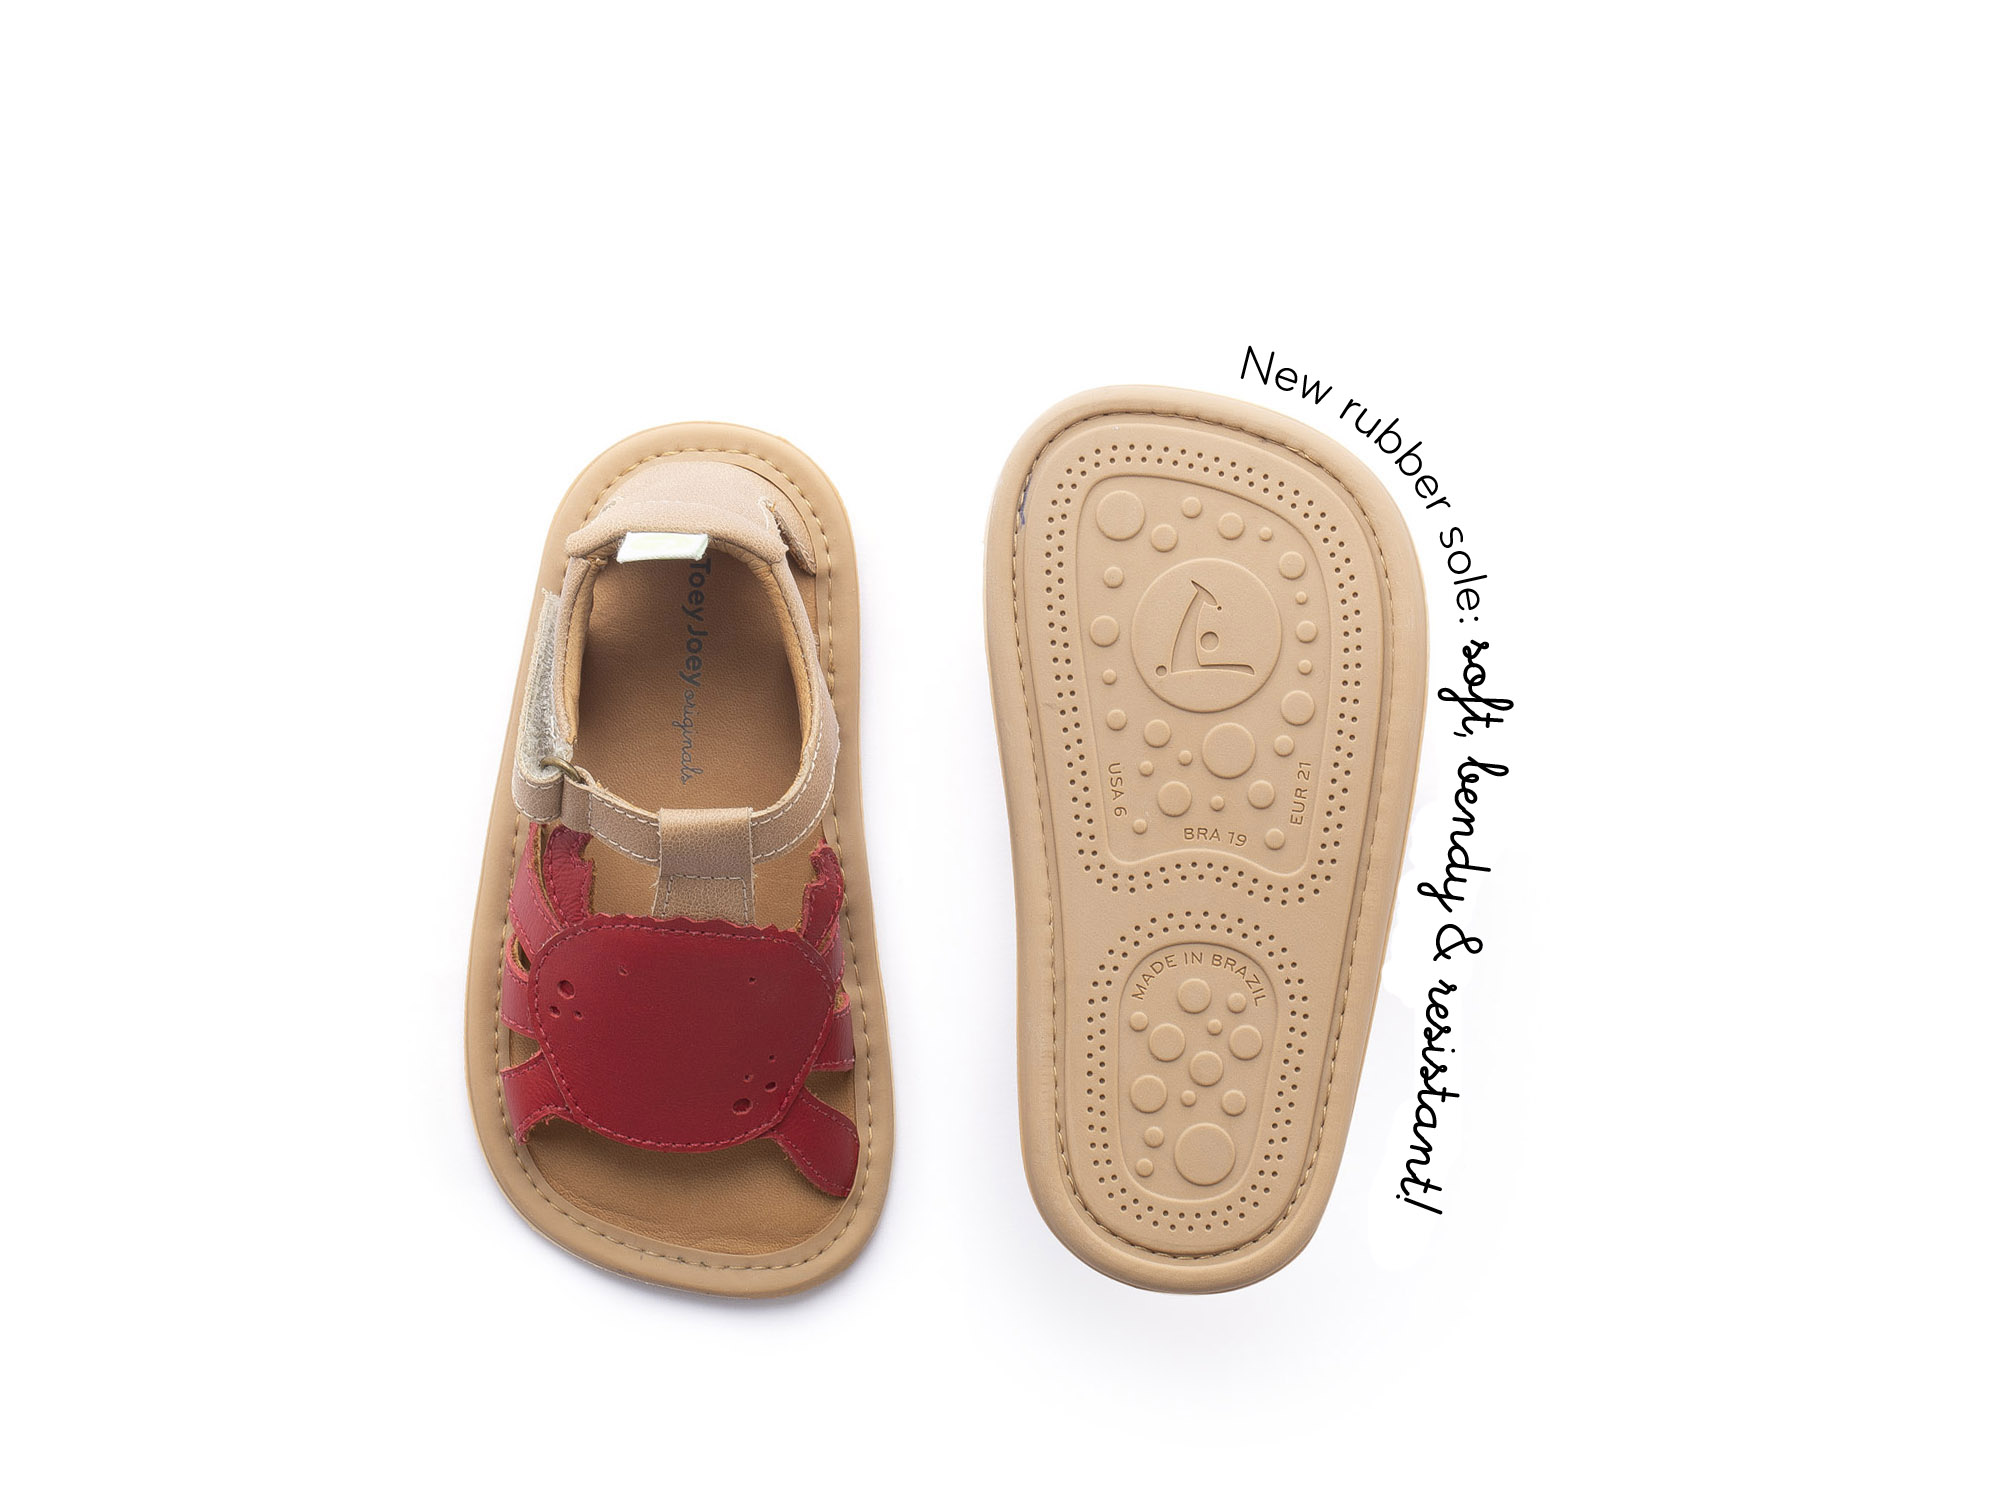 SIT & CRAWL Sandals for Boys Craby | Tip Toey Joey - Australia - 1